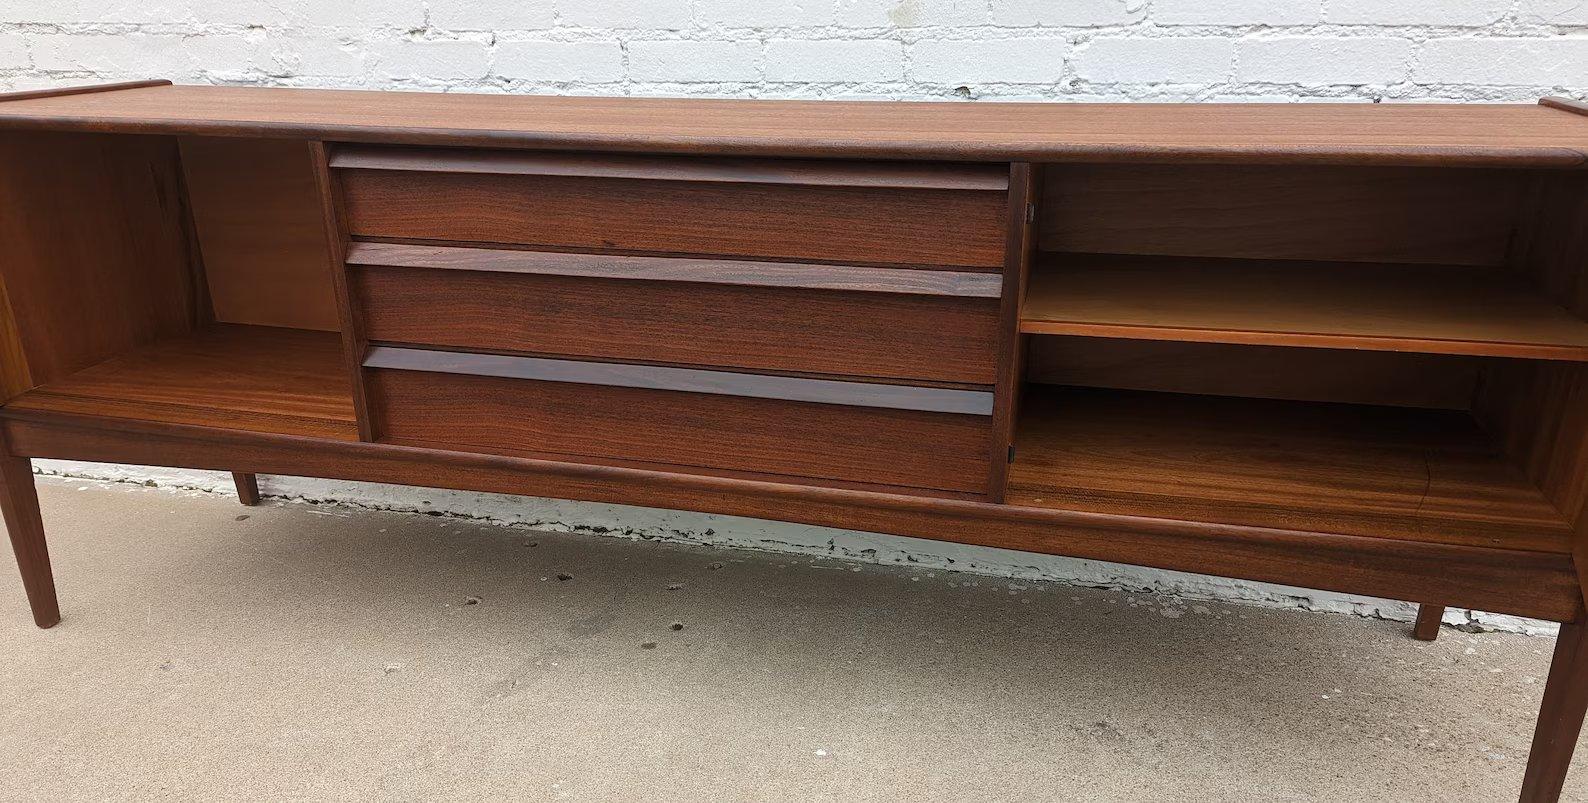 Mid Century English Modern Teak Credenza by Younger
 
Above average vintage condition and structurally sound. Has some expected slight finish wear and scratching. Top has been refinished and does not have original finish. Back in piece is finished